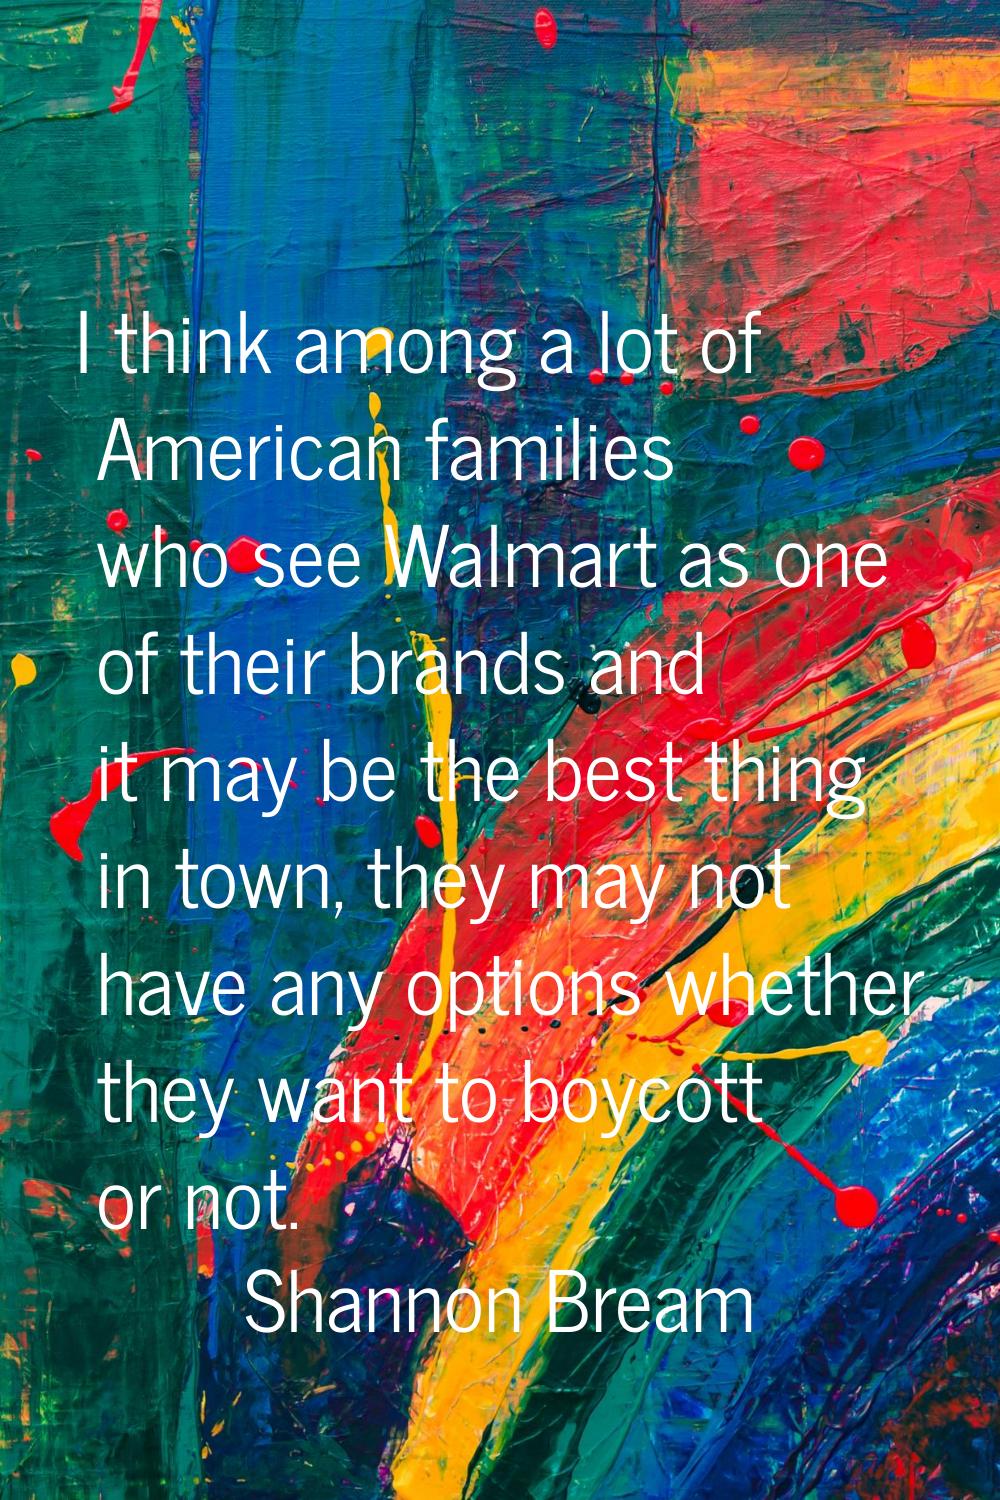 I think among a lot of American families who see Walmart as one of their brands and it may be the b